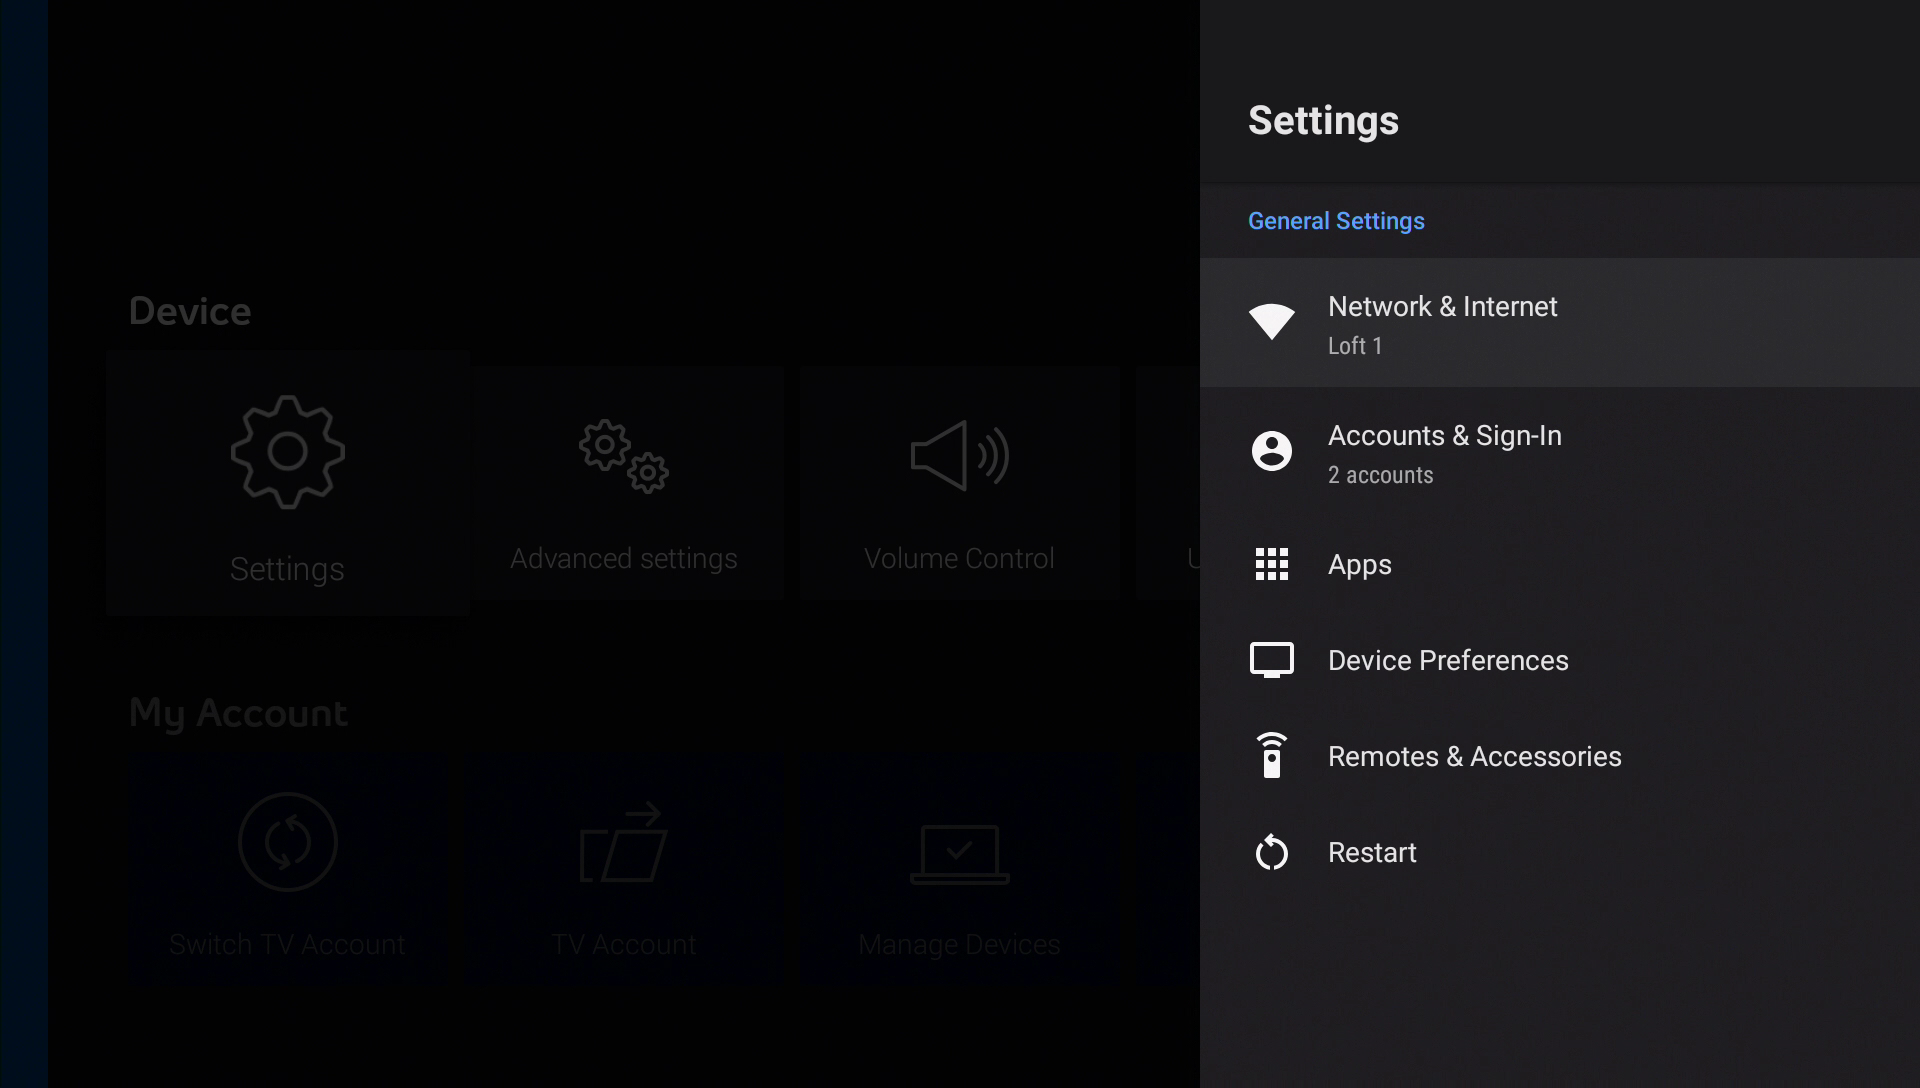 Scroll down to the Device section and select Settings.